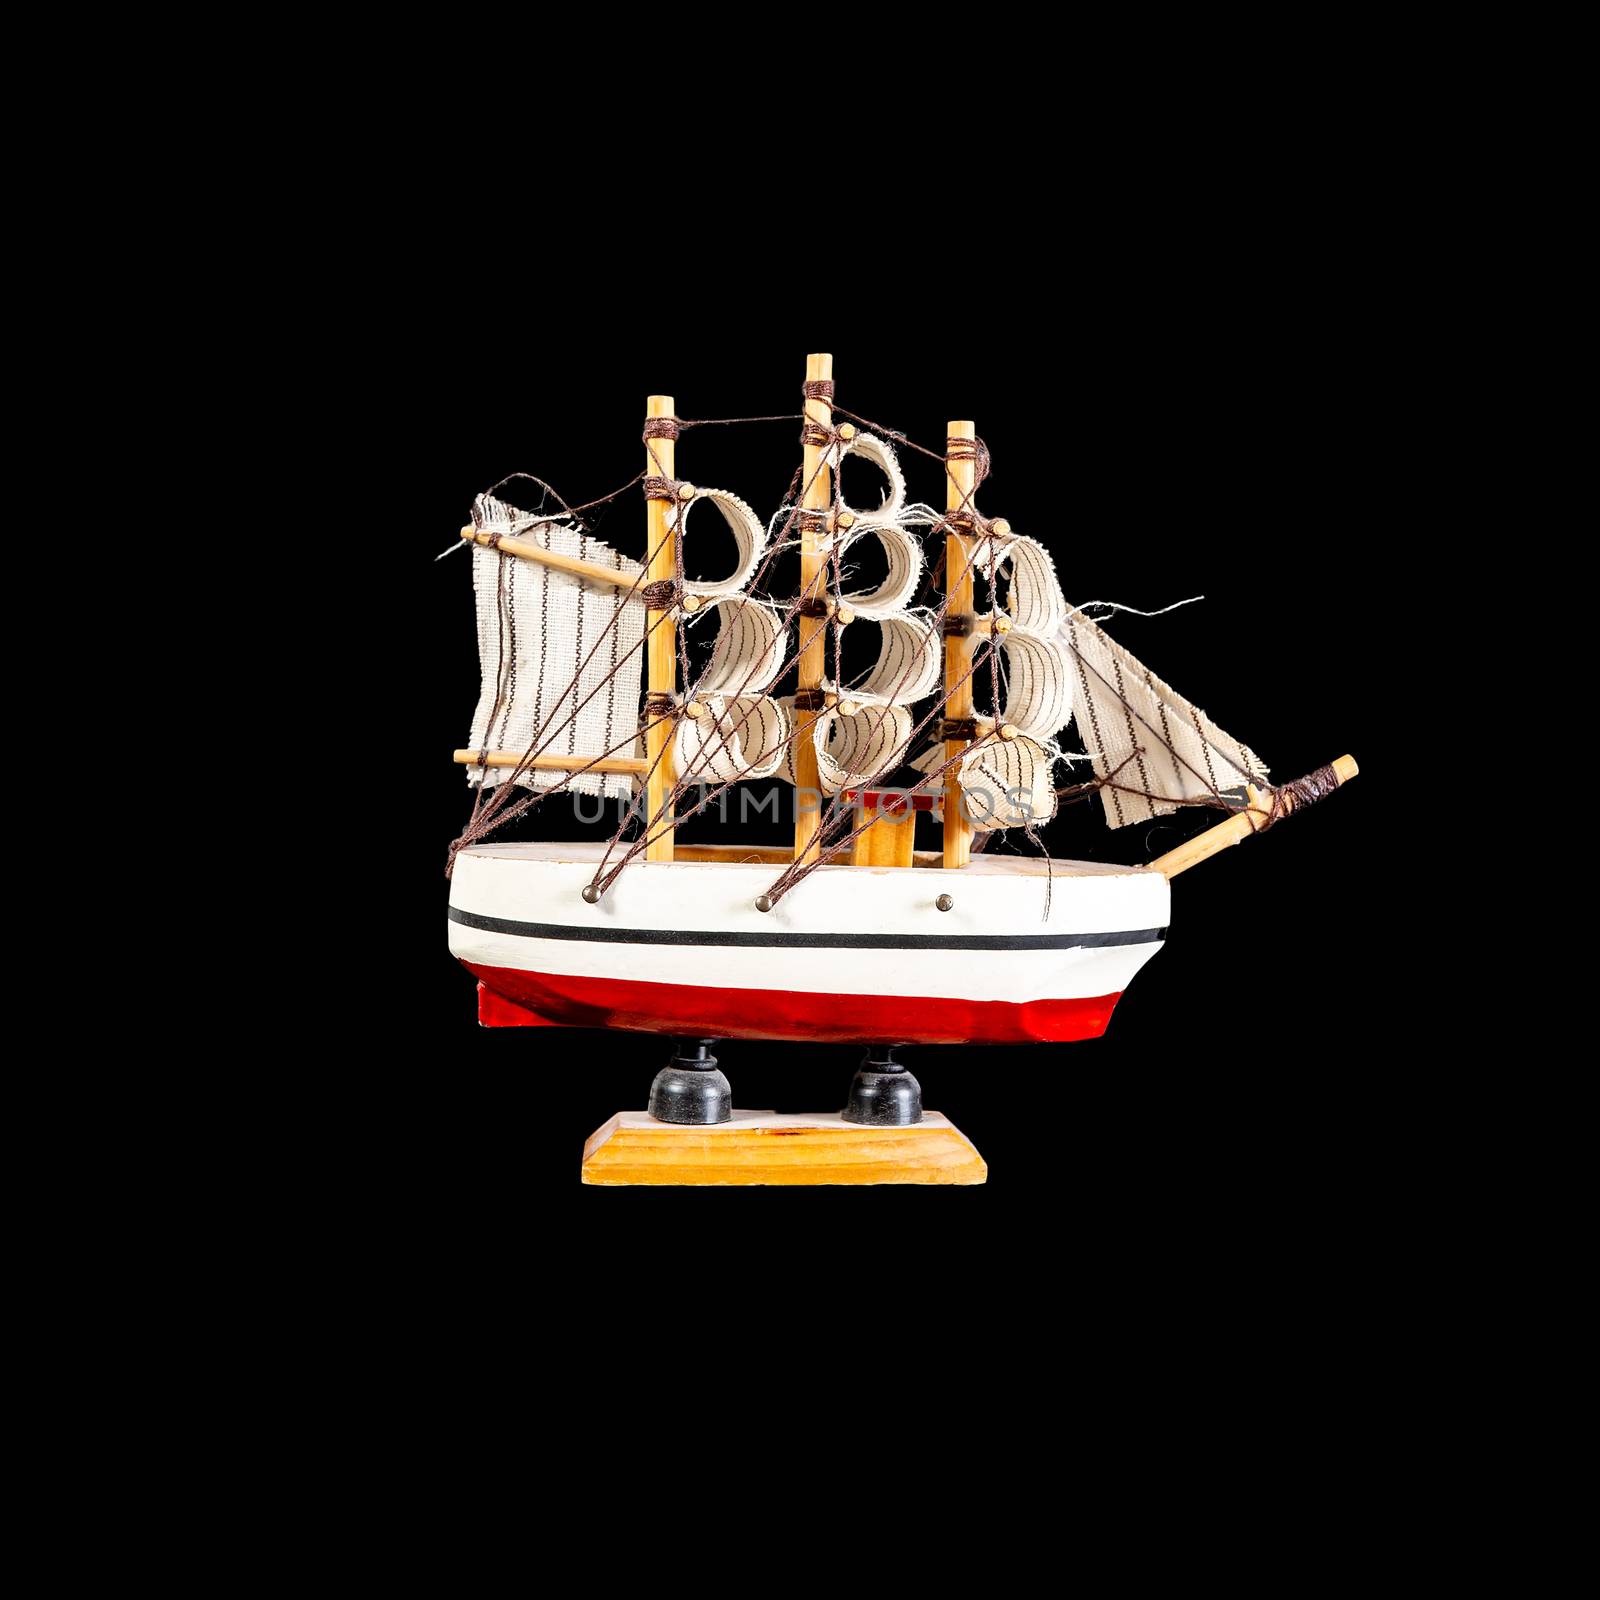 Toy boat sailboat on a wooden stand isolated on a black background by 977_ReX_977